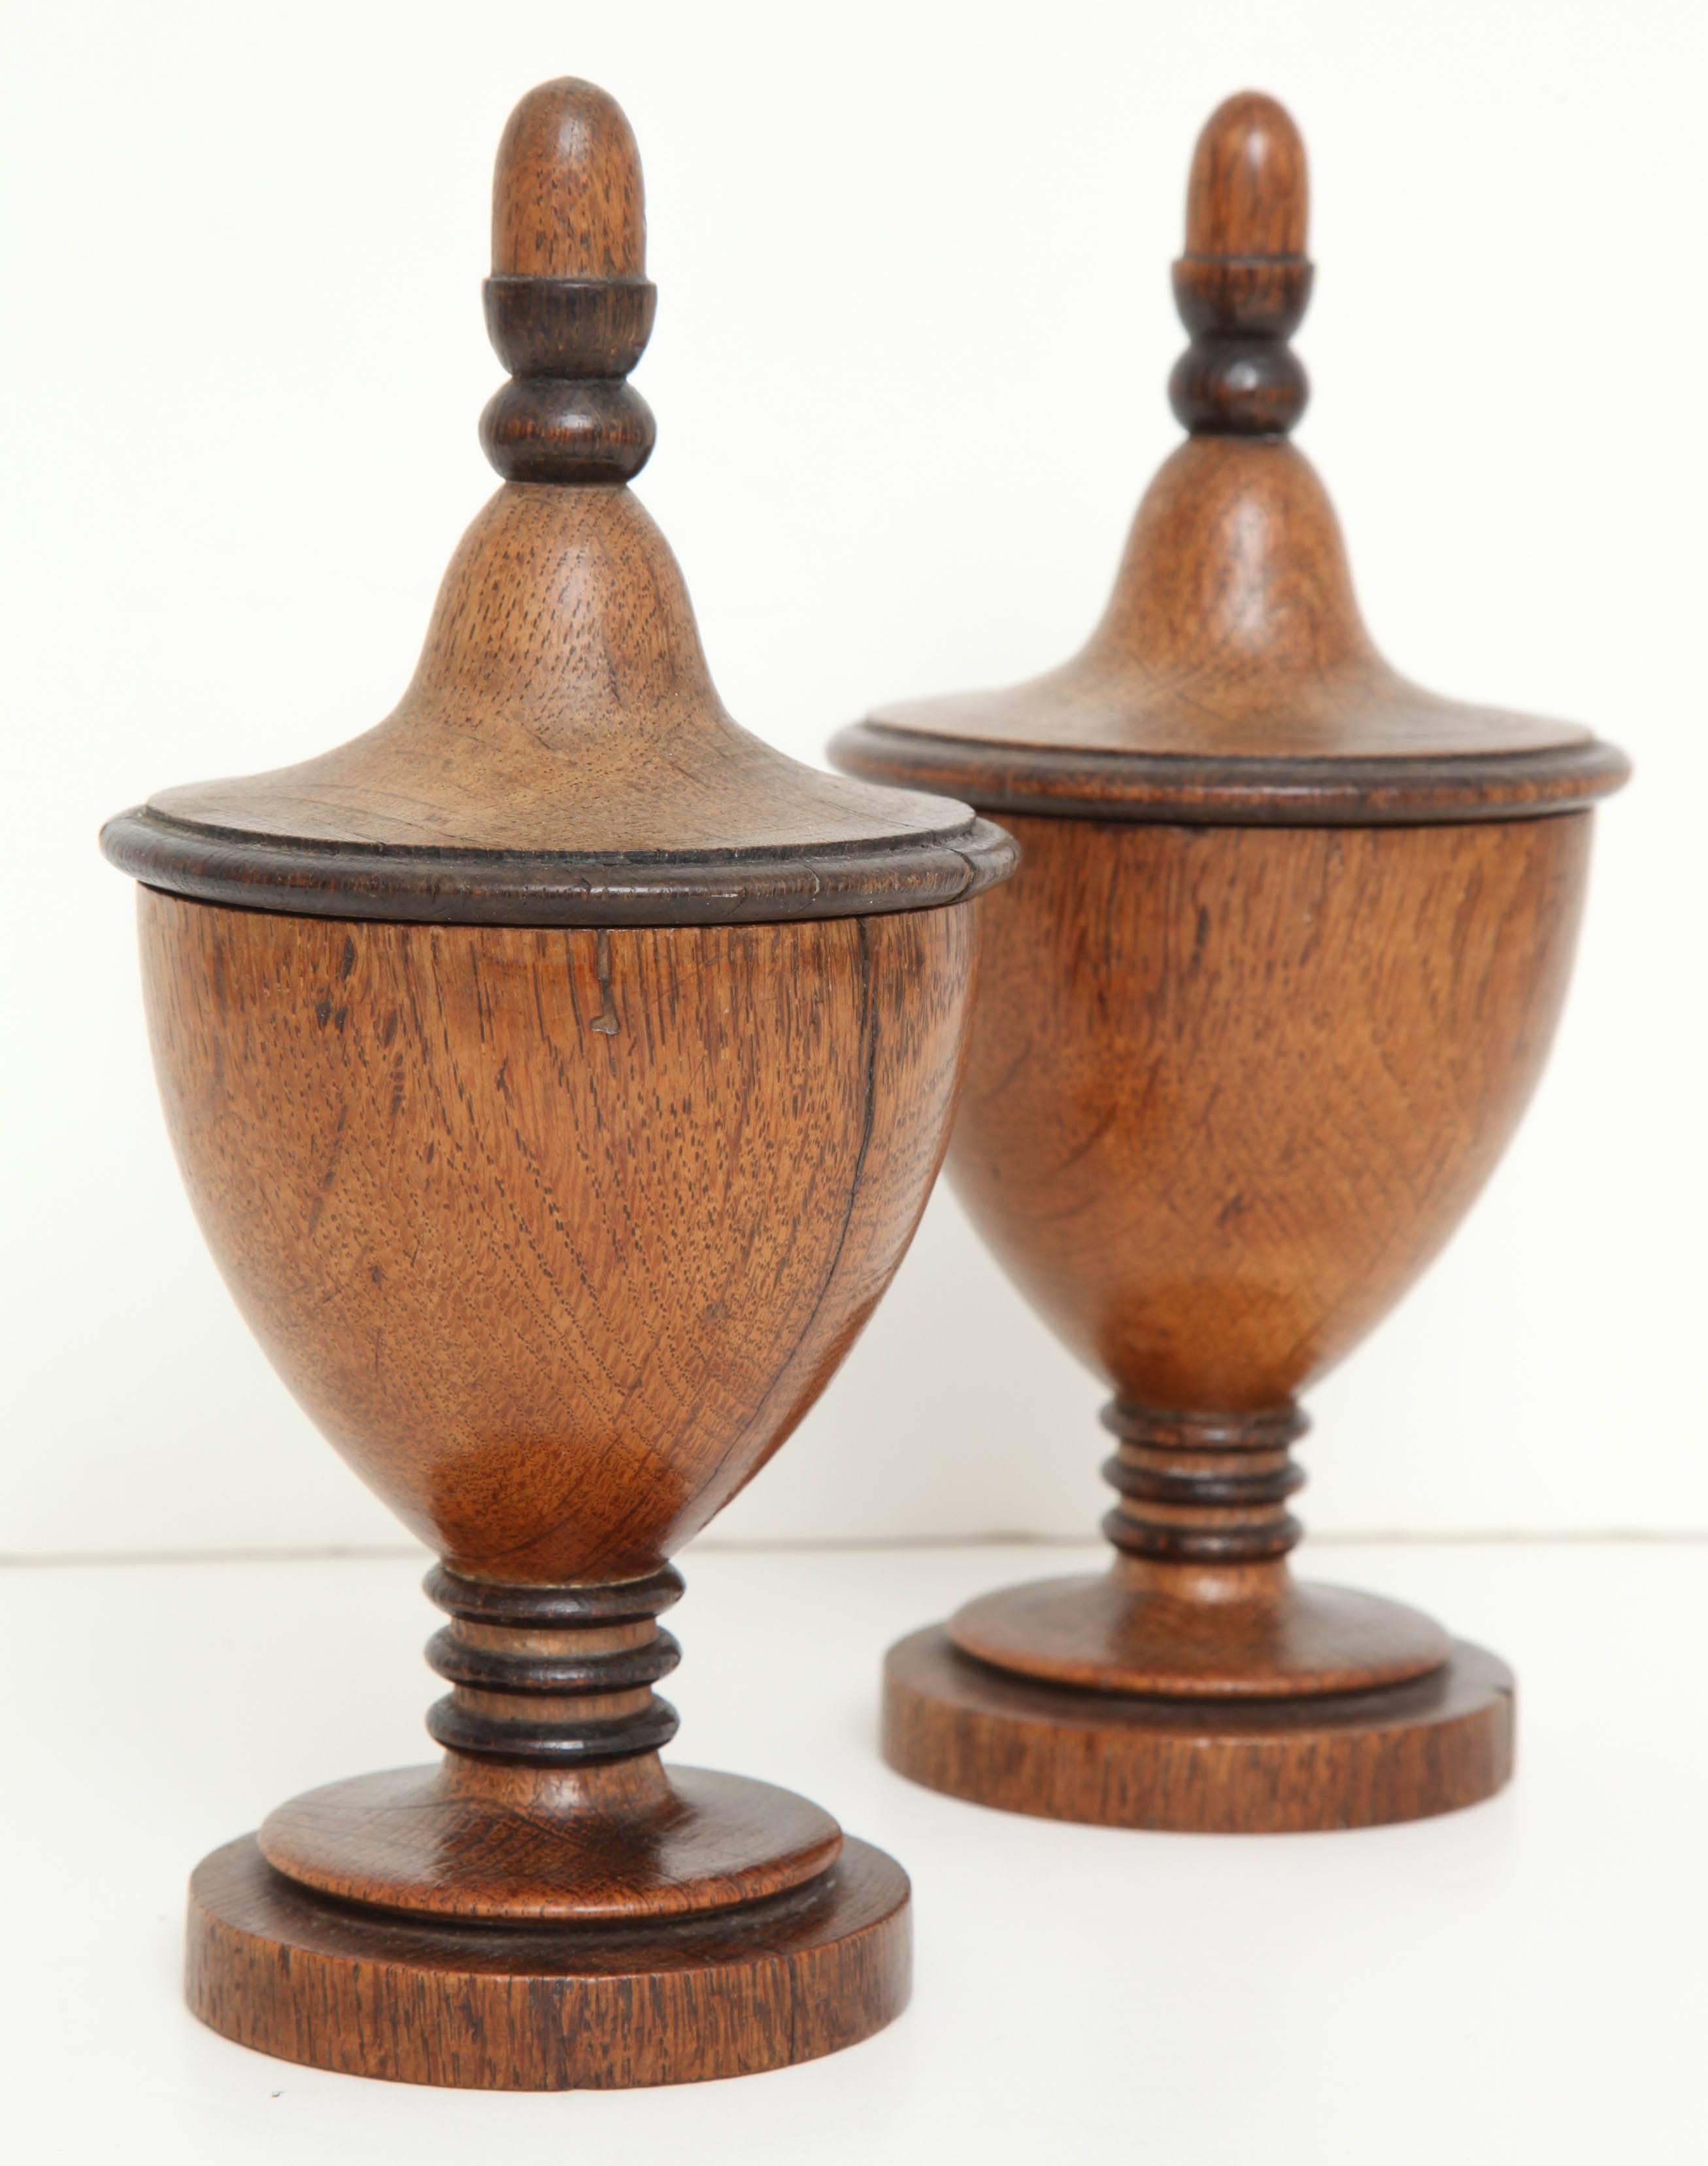 Regency A Pair of Early 19th Century English Neoclassocal Urns